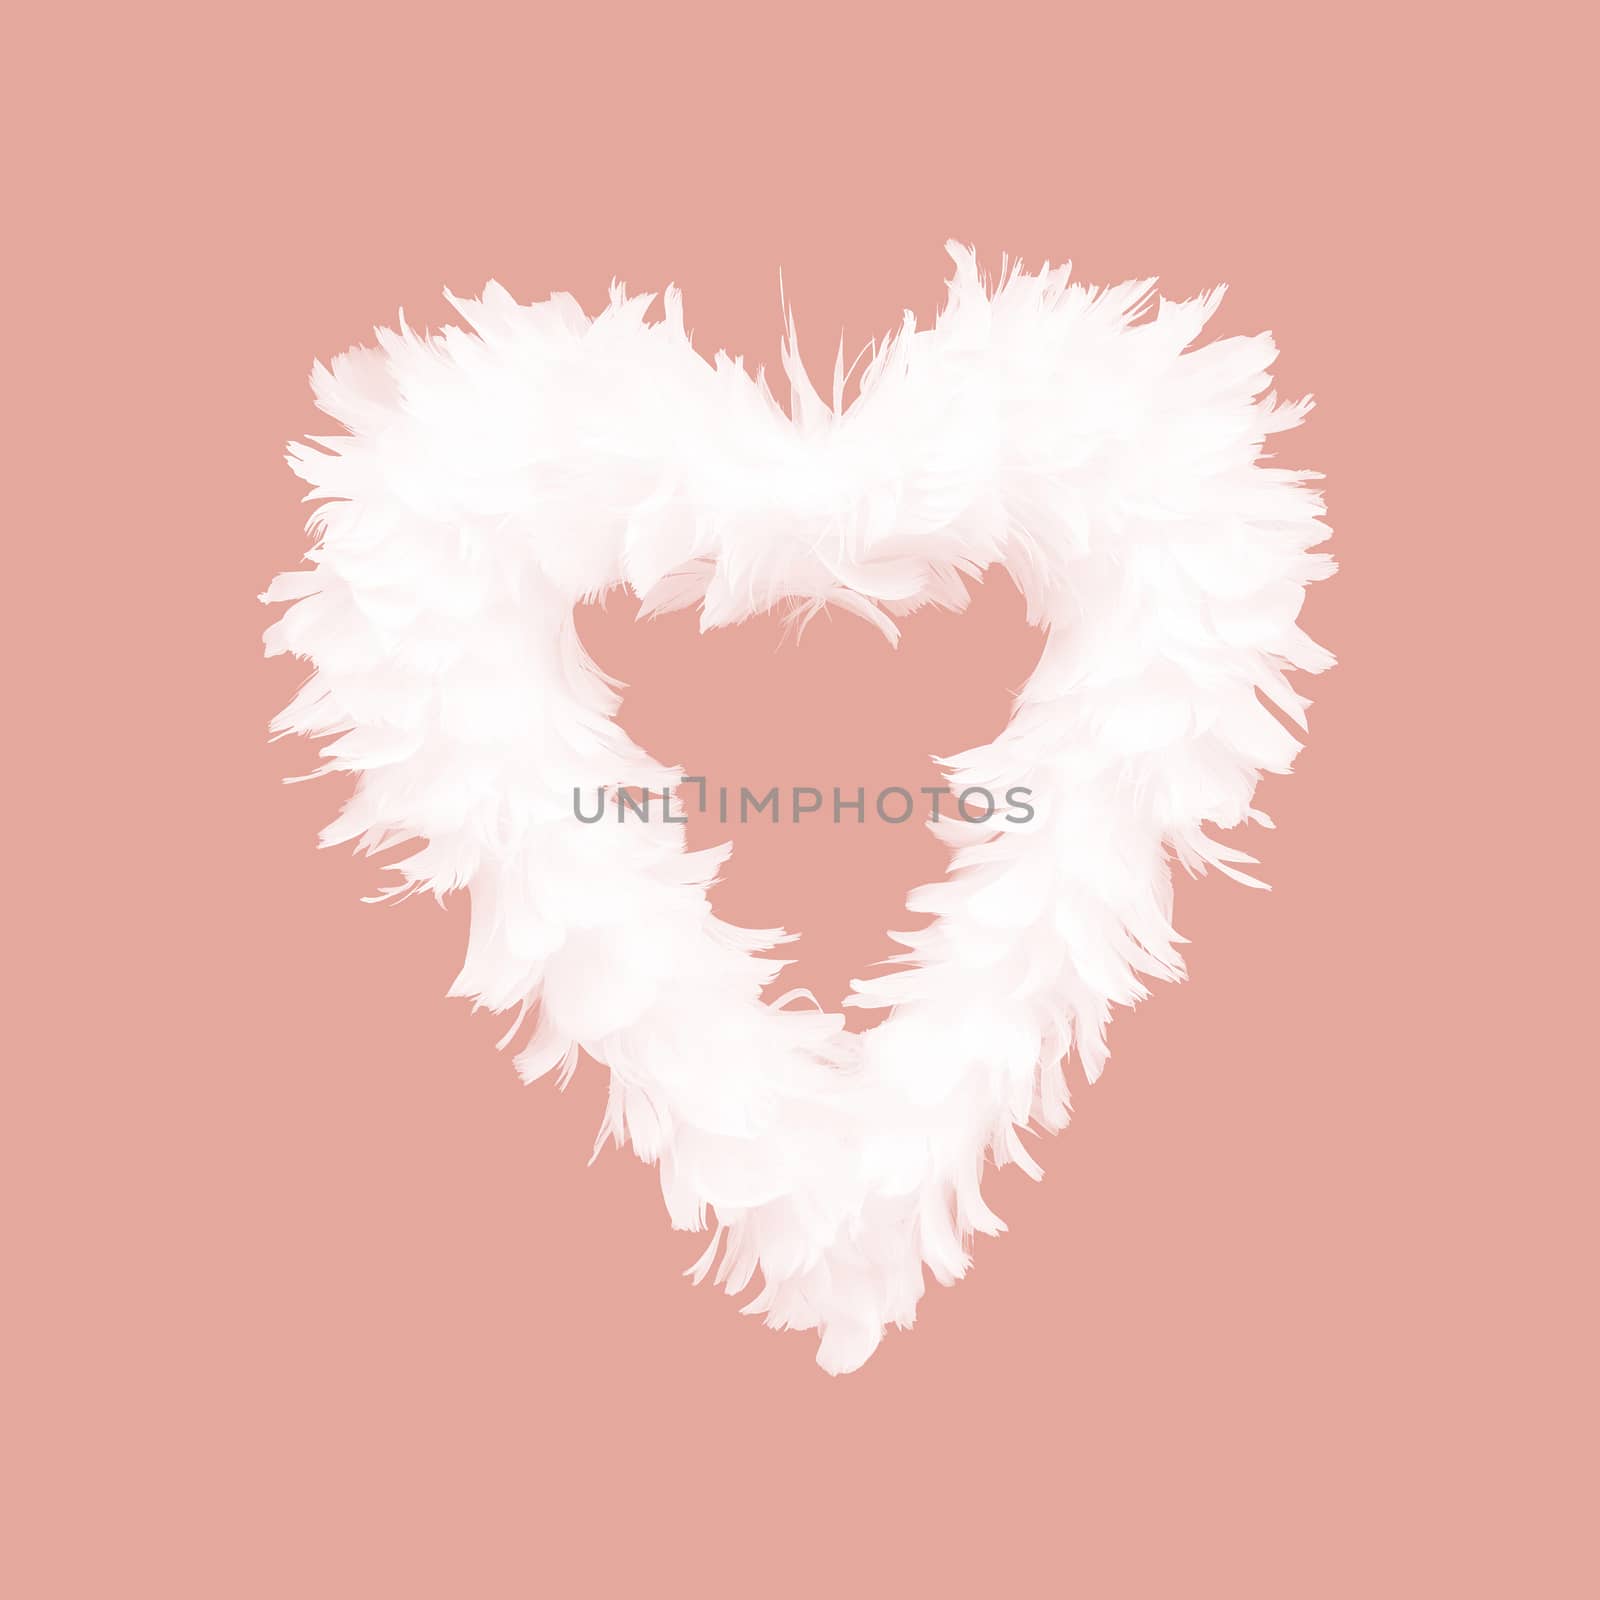 White feathers arranged in heart shape on Living Coral color background.